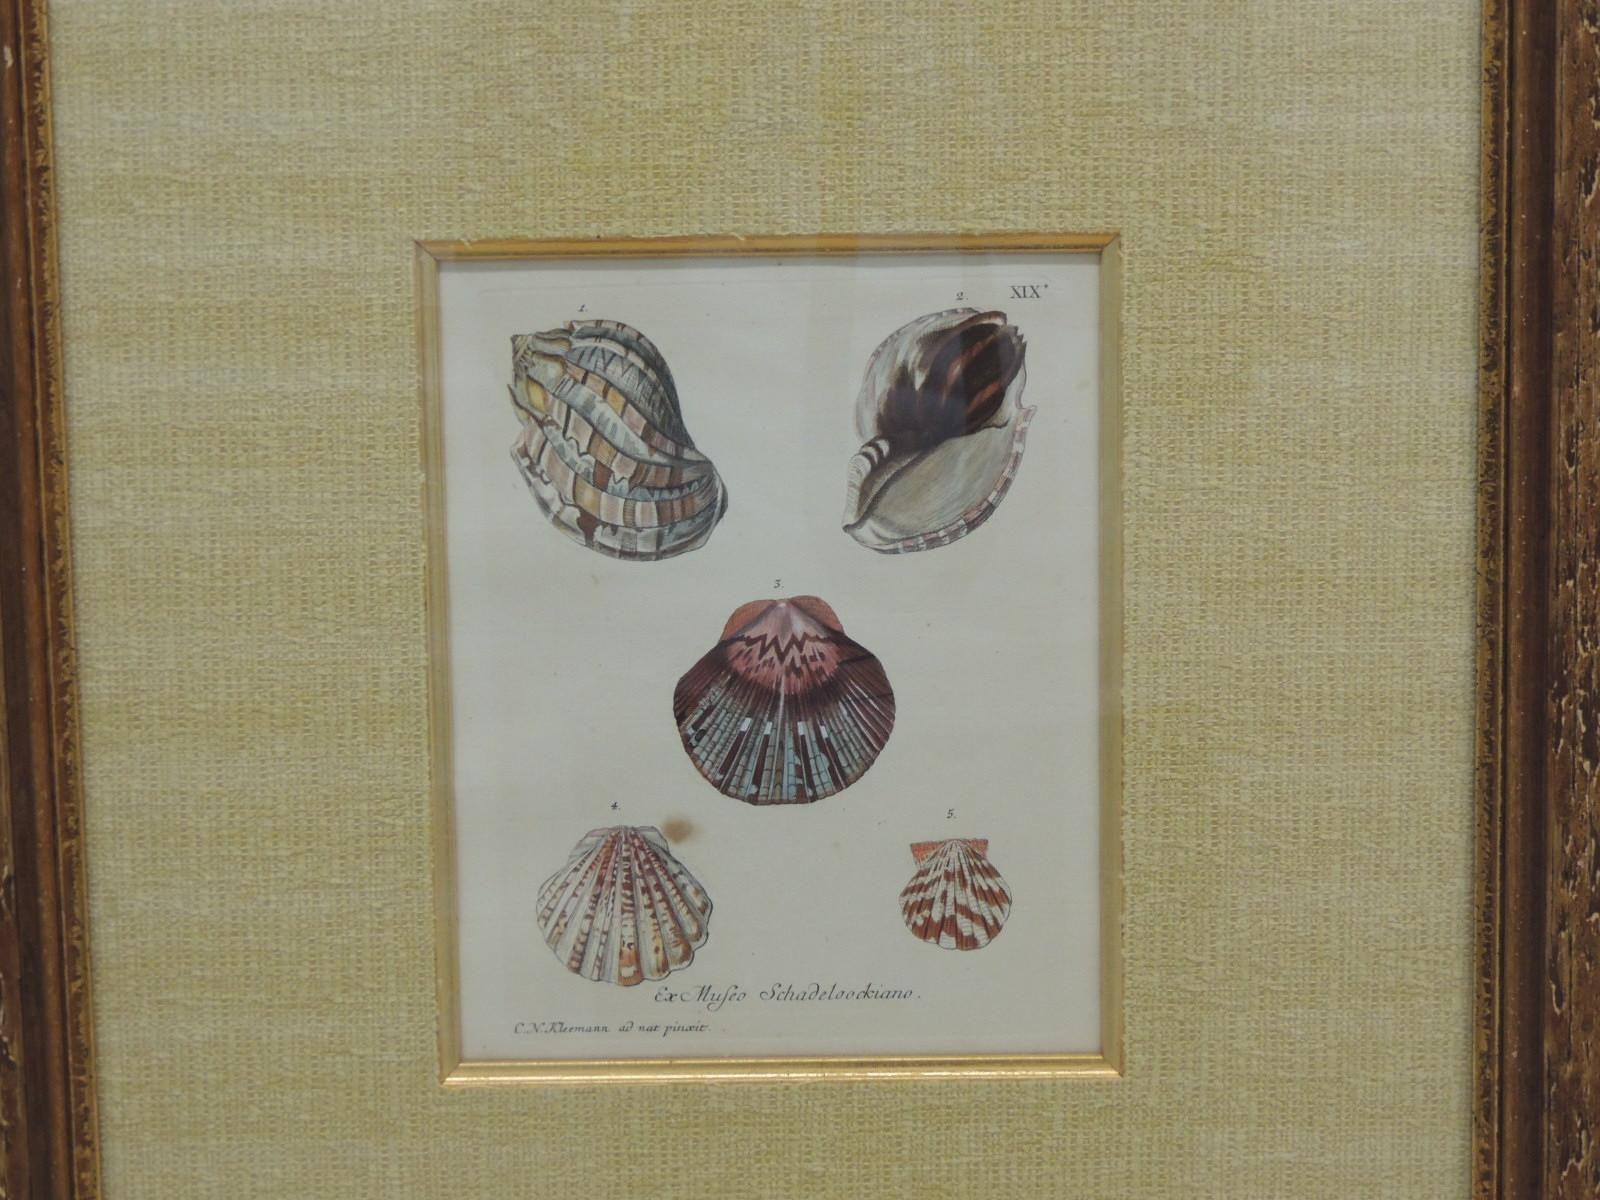 Vintage seashells specimen print
Framed with raffia and bark wood frame with gold leaf accent
Gold detail around the mat
Size: 18